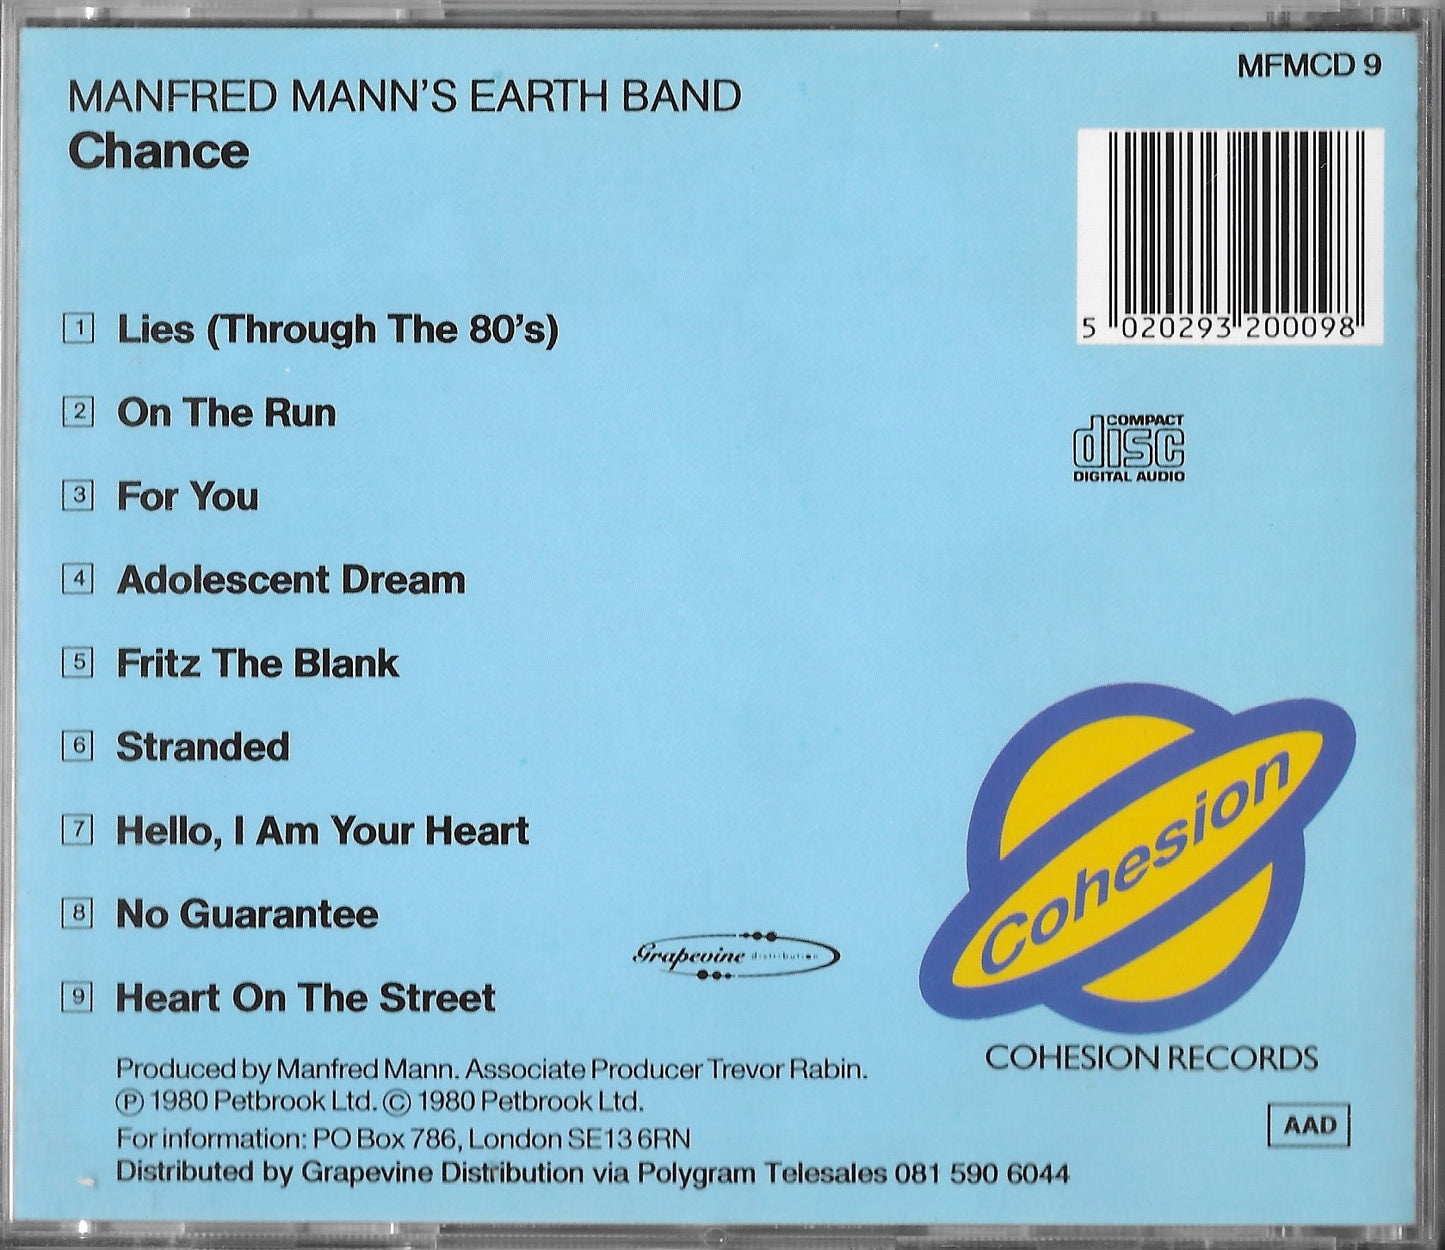 MANFRED MANN'S EARTH BAND - Chance